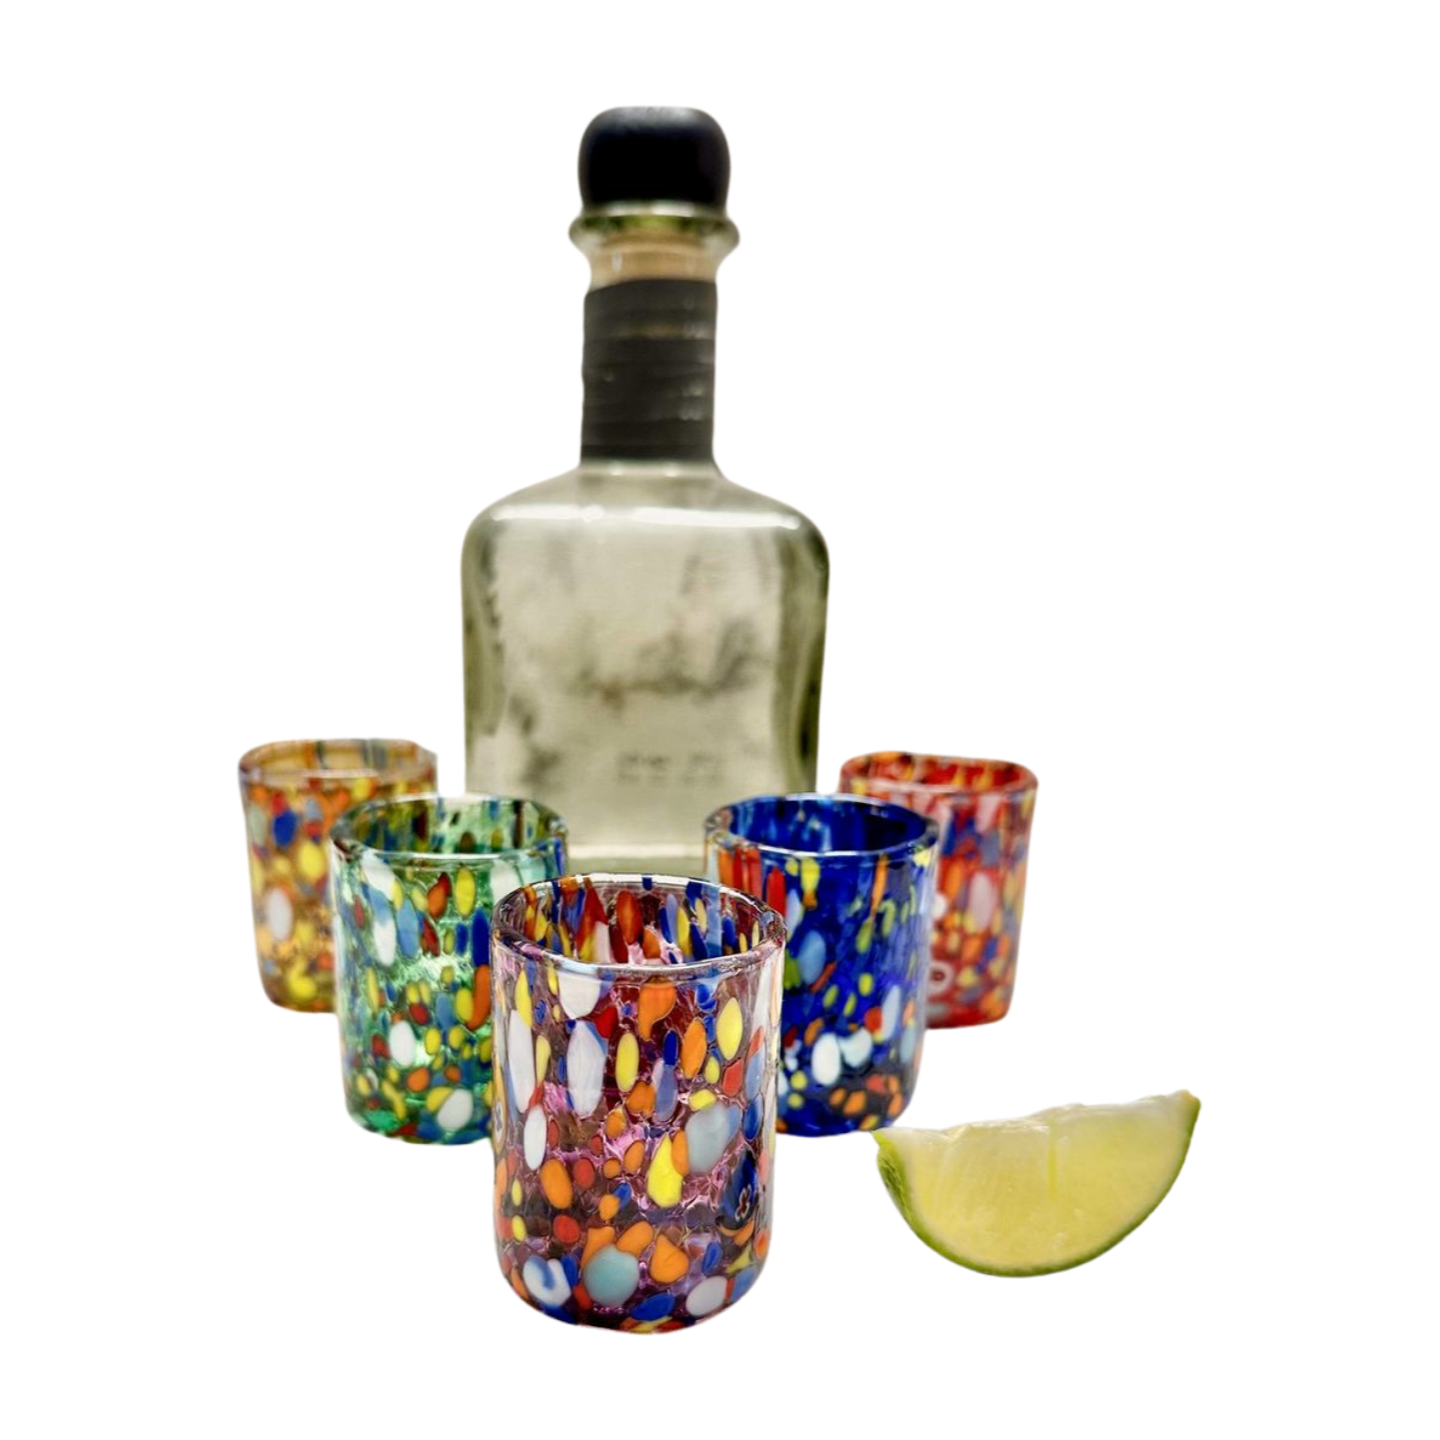 Murano glass shot glasses show with a bottle of tequila and a sliced lime.